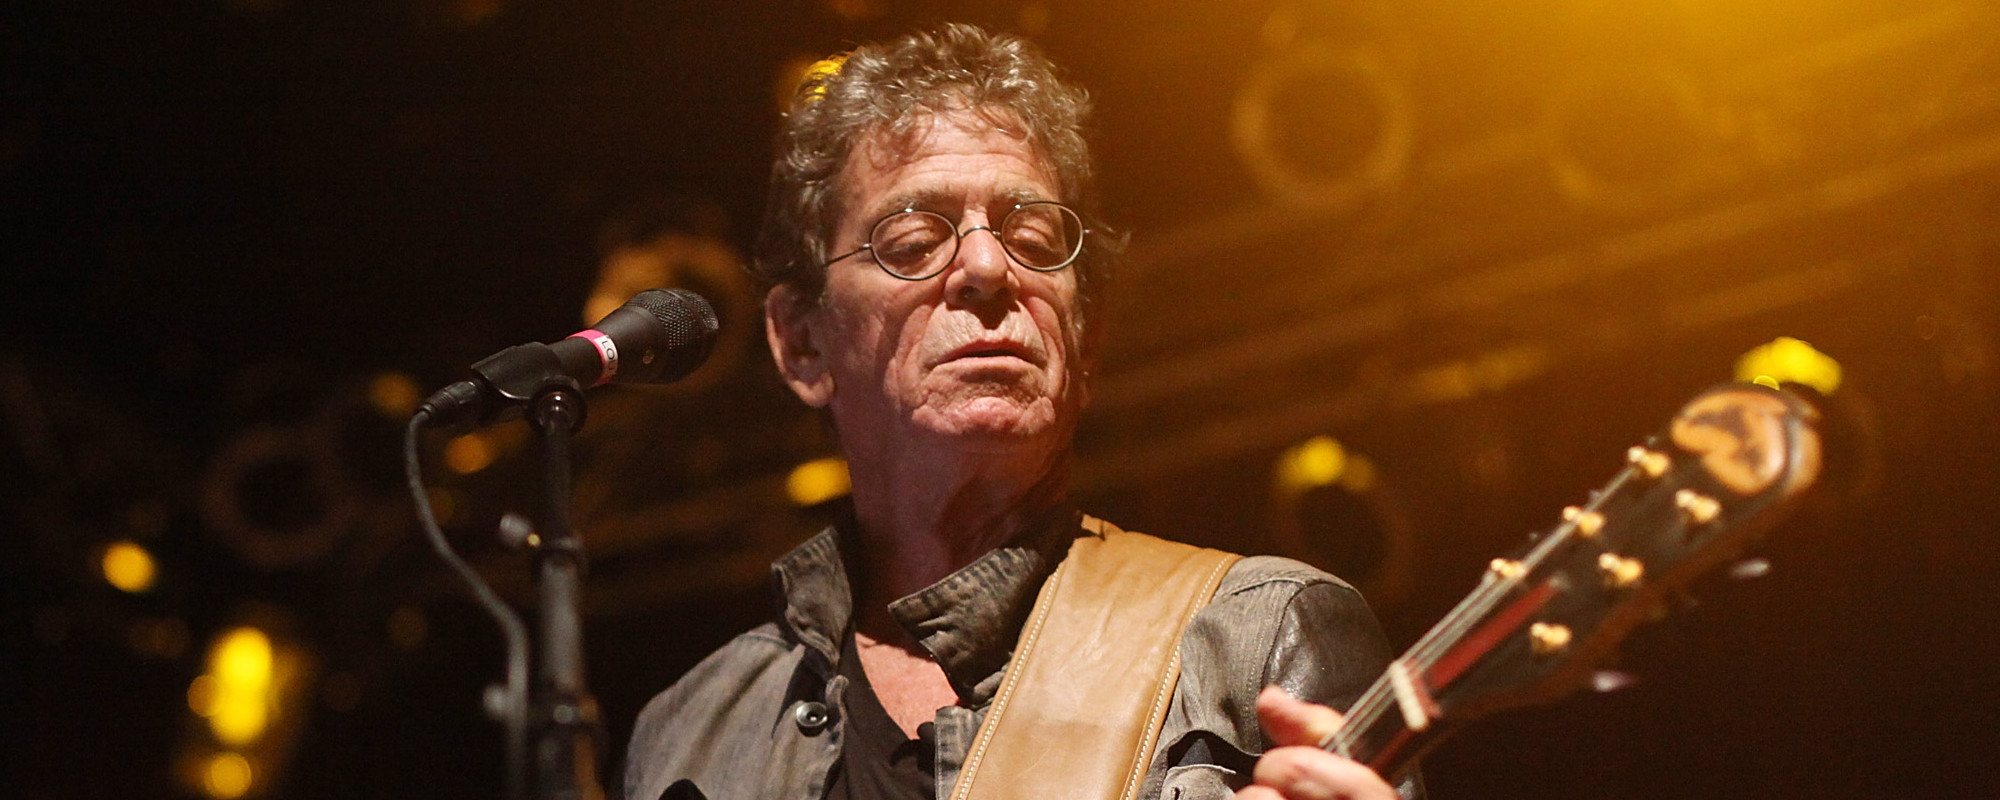 Lou Reed’s Meditative Final Solo Album, ‘Hudson River Wind Meditations,’ to Be Reissued